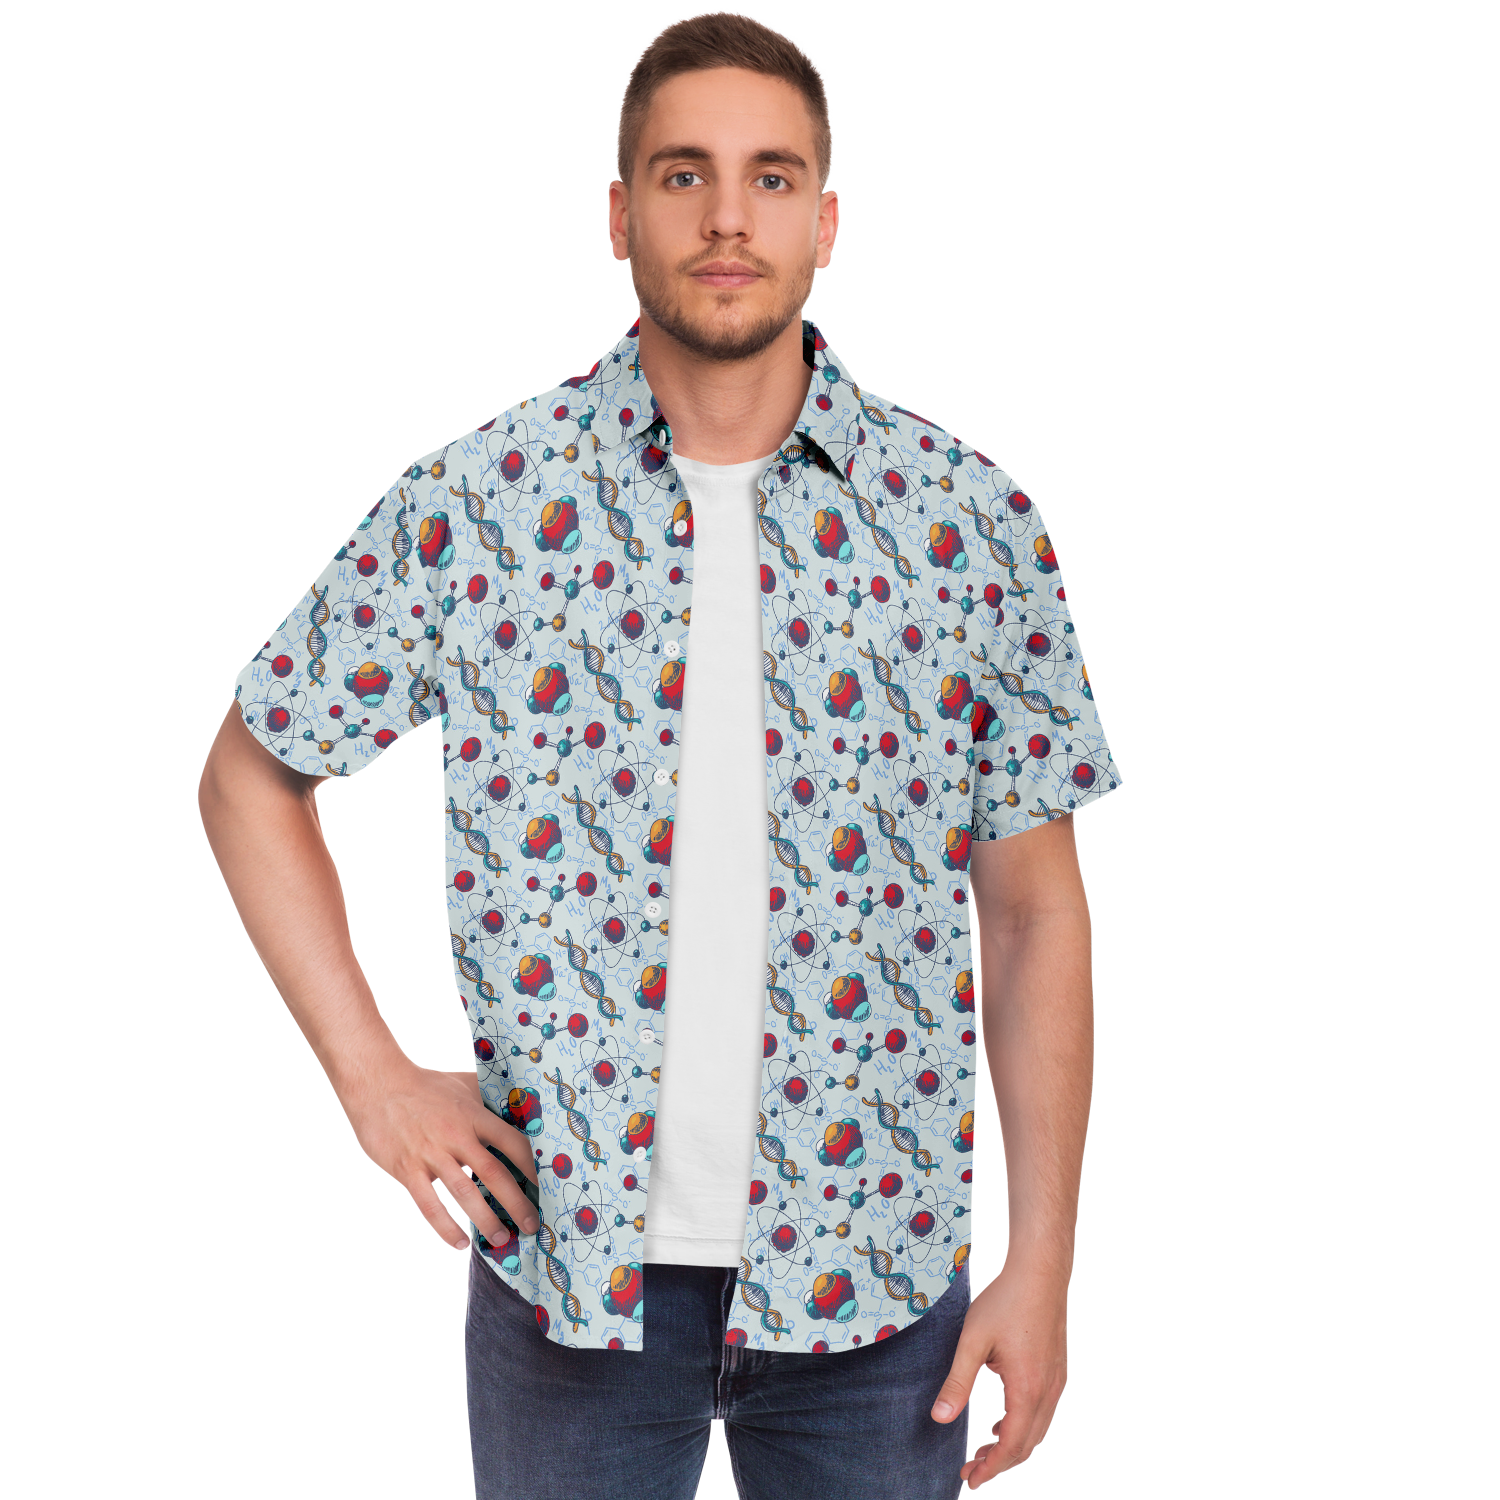 DNA Button Down – Geek Out Your Nerd